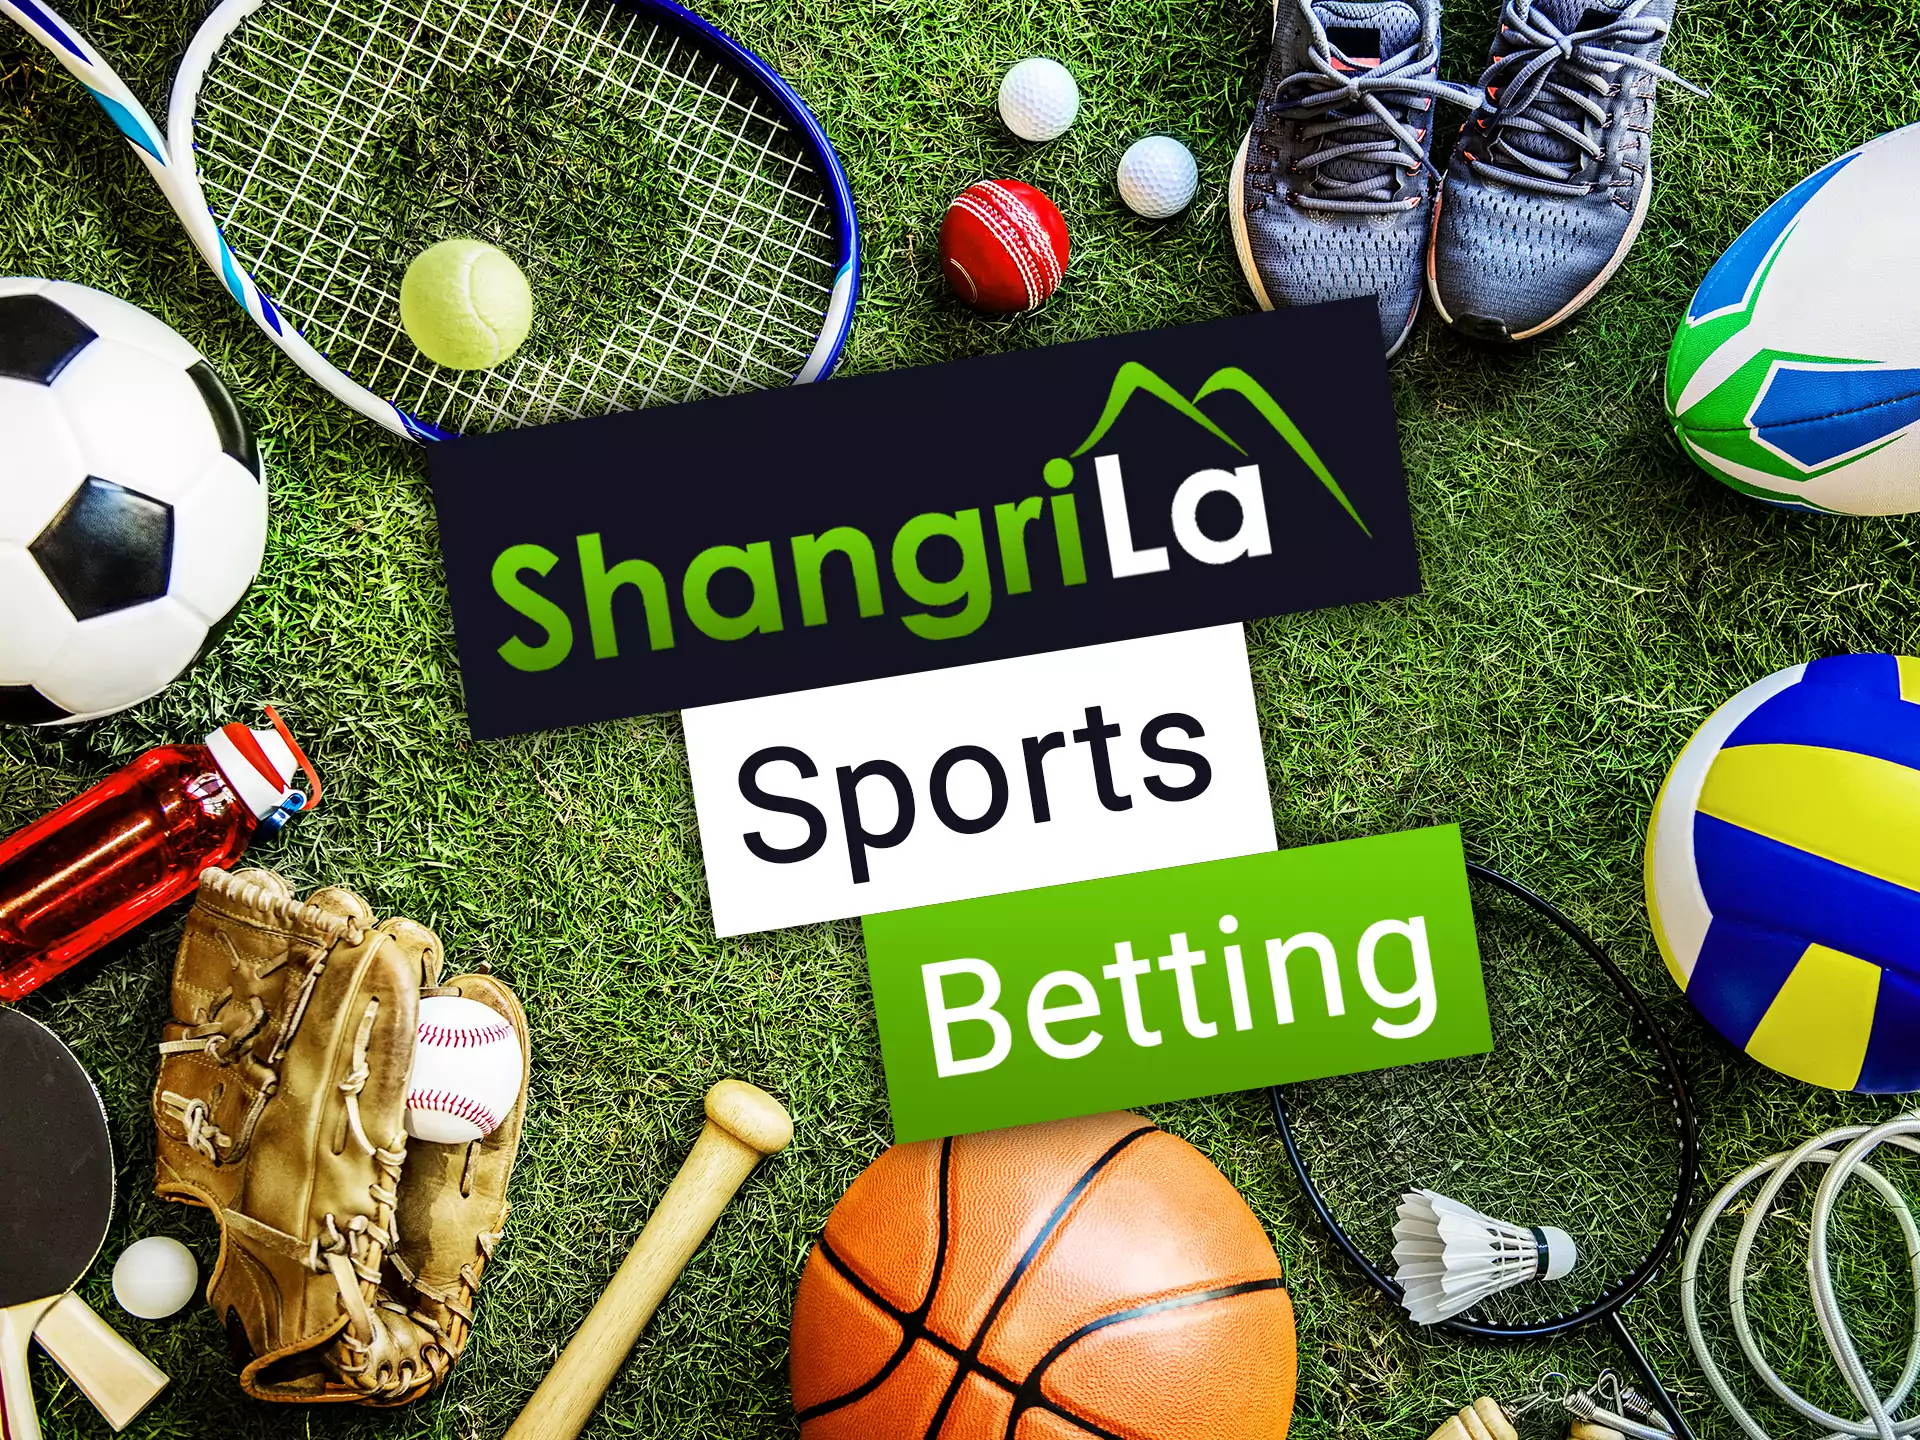 Choose on which of Shangri La sports you want to bet on.